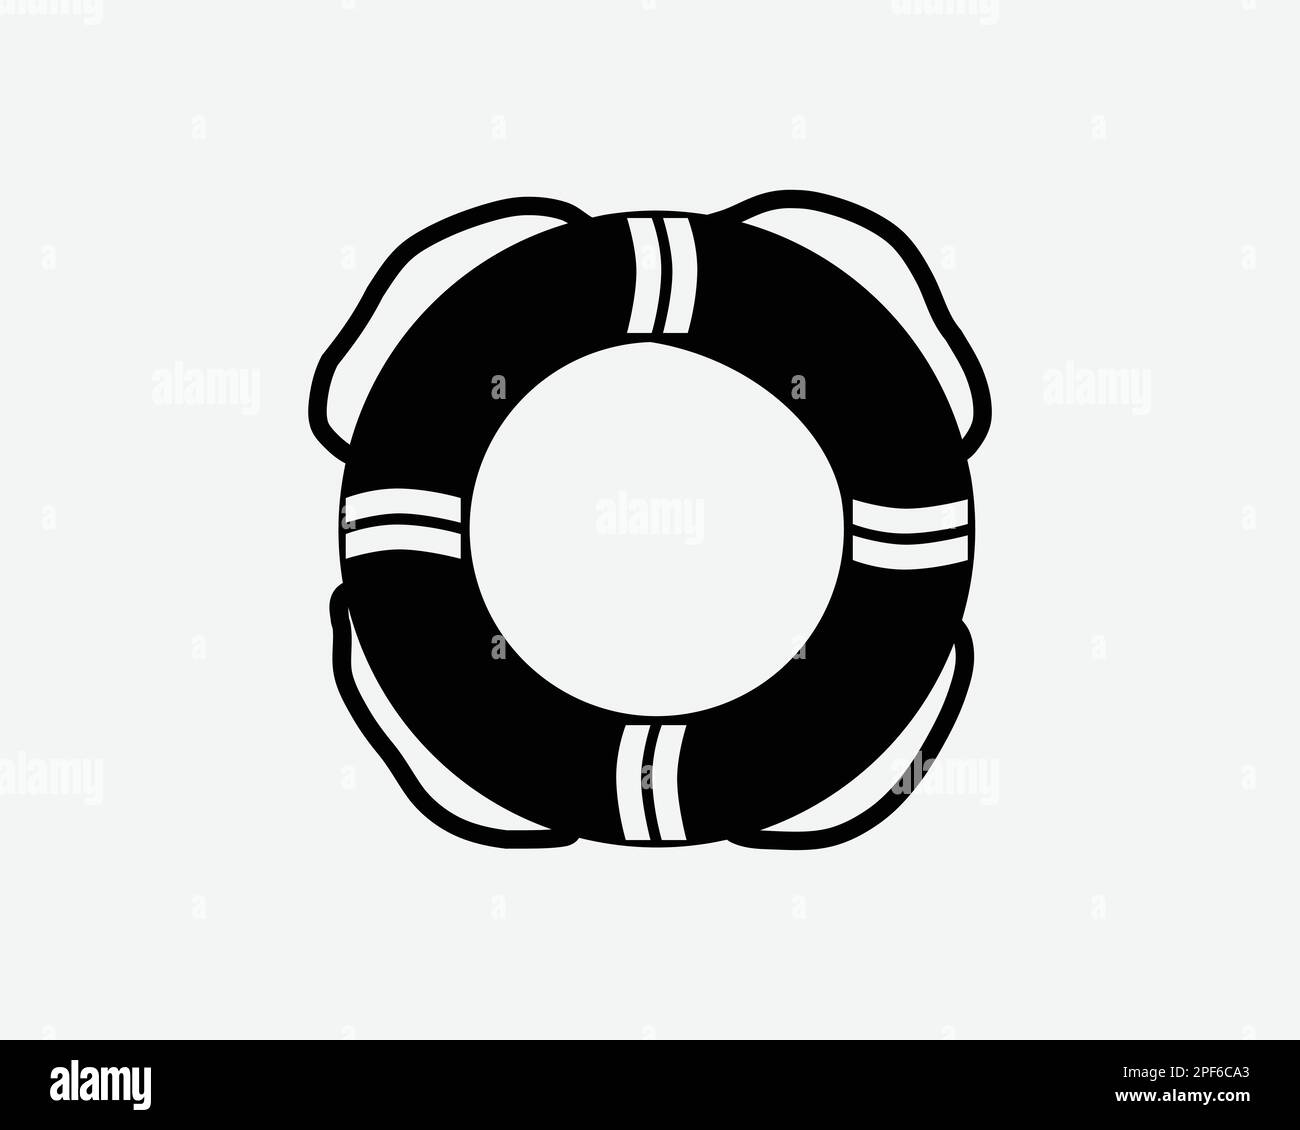 Lifebuoy Ring Life Buoy Float Floatation Emergency Rescue Black White Silhouette Sign Symbol Icon Clipart Graphic Artwork Pictogram Illustration Vecto Stock Vector